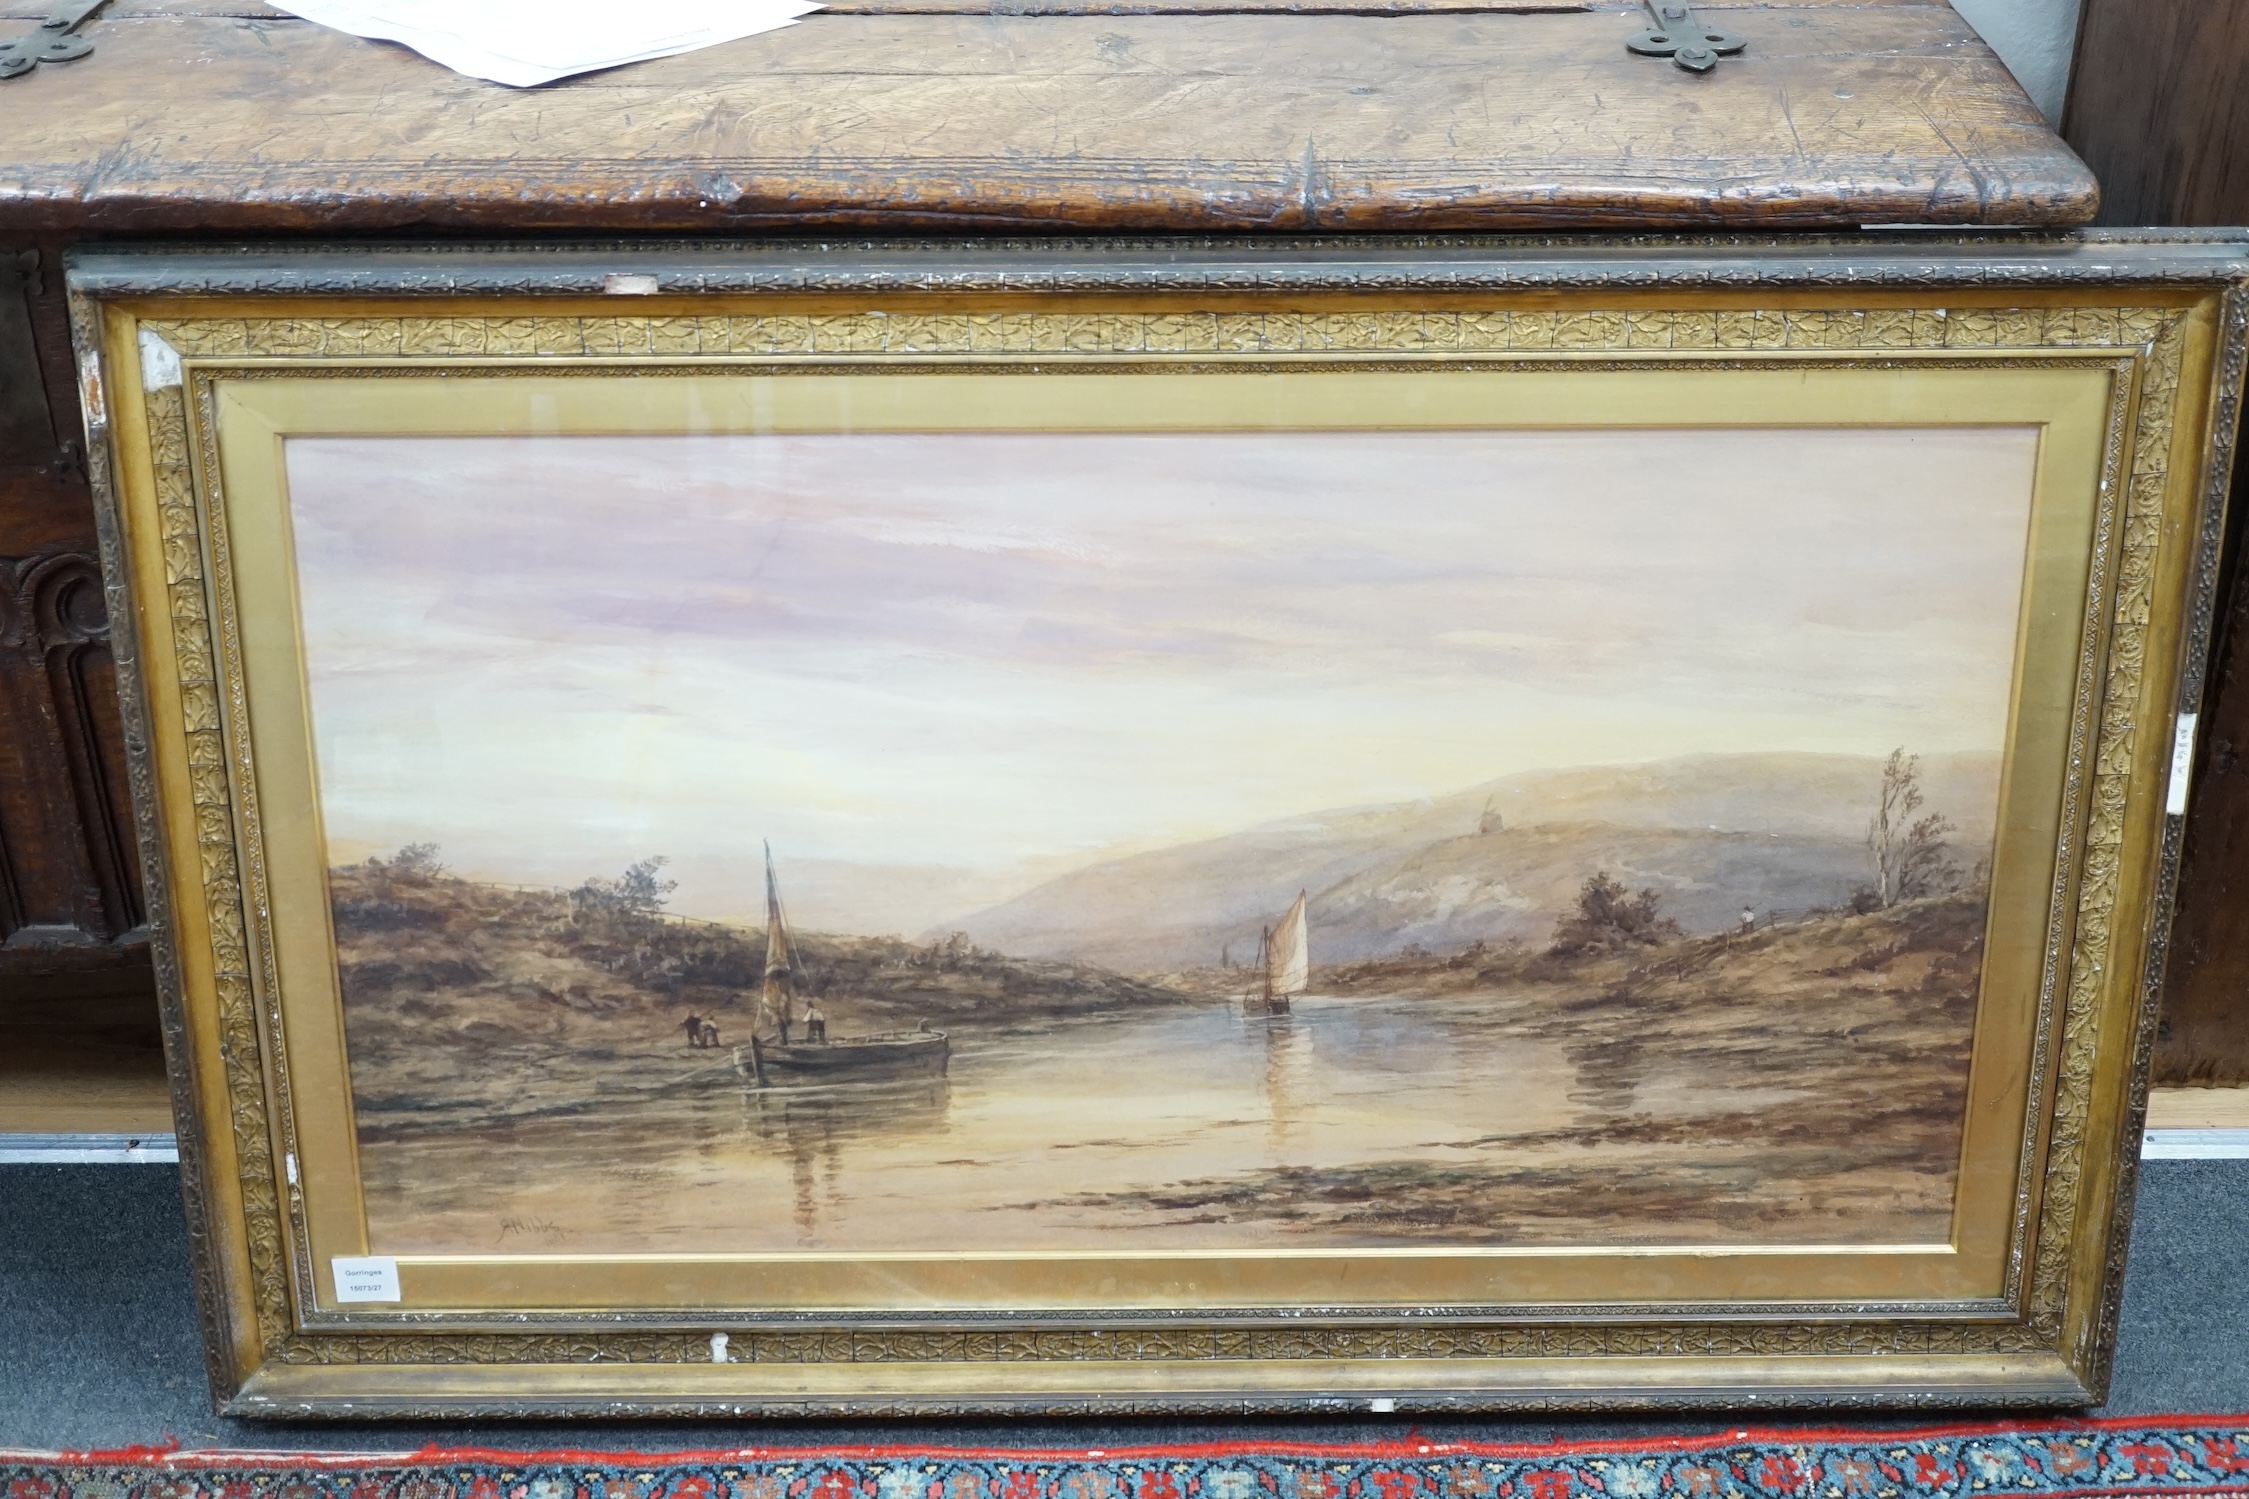 Richard Henry Nibbs (1816-1893), watercolour, Extensive river landscape, signed and dated 1881, 53 x 102cm, gilt framed. Condition - poor